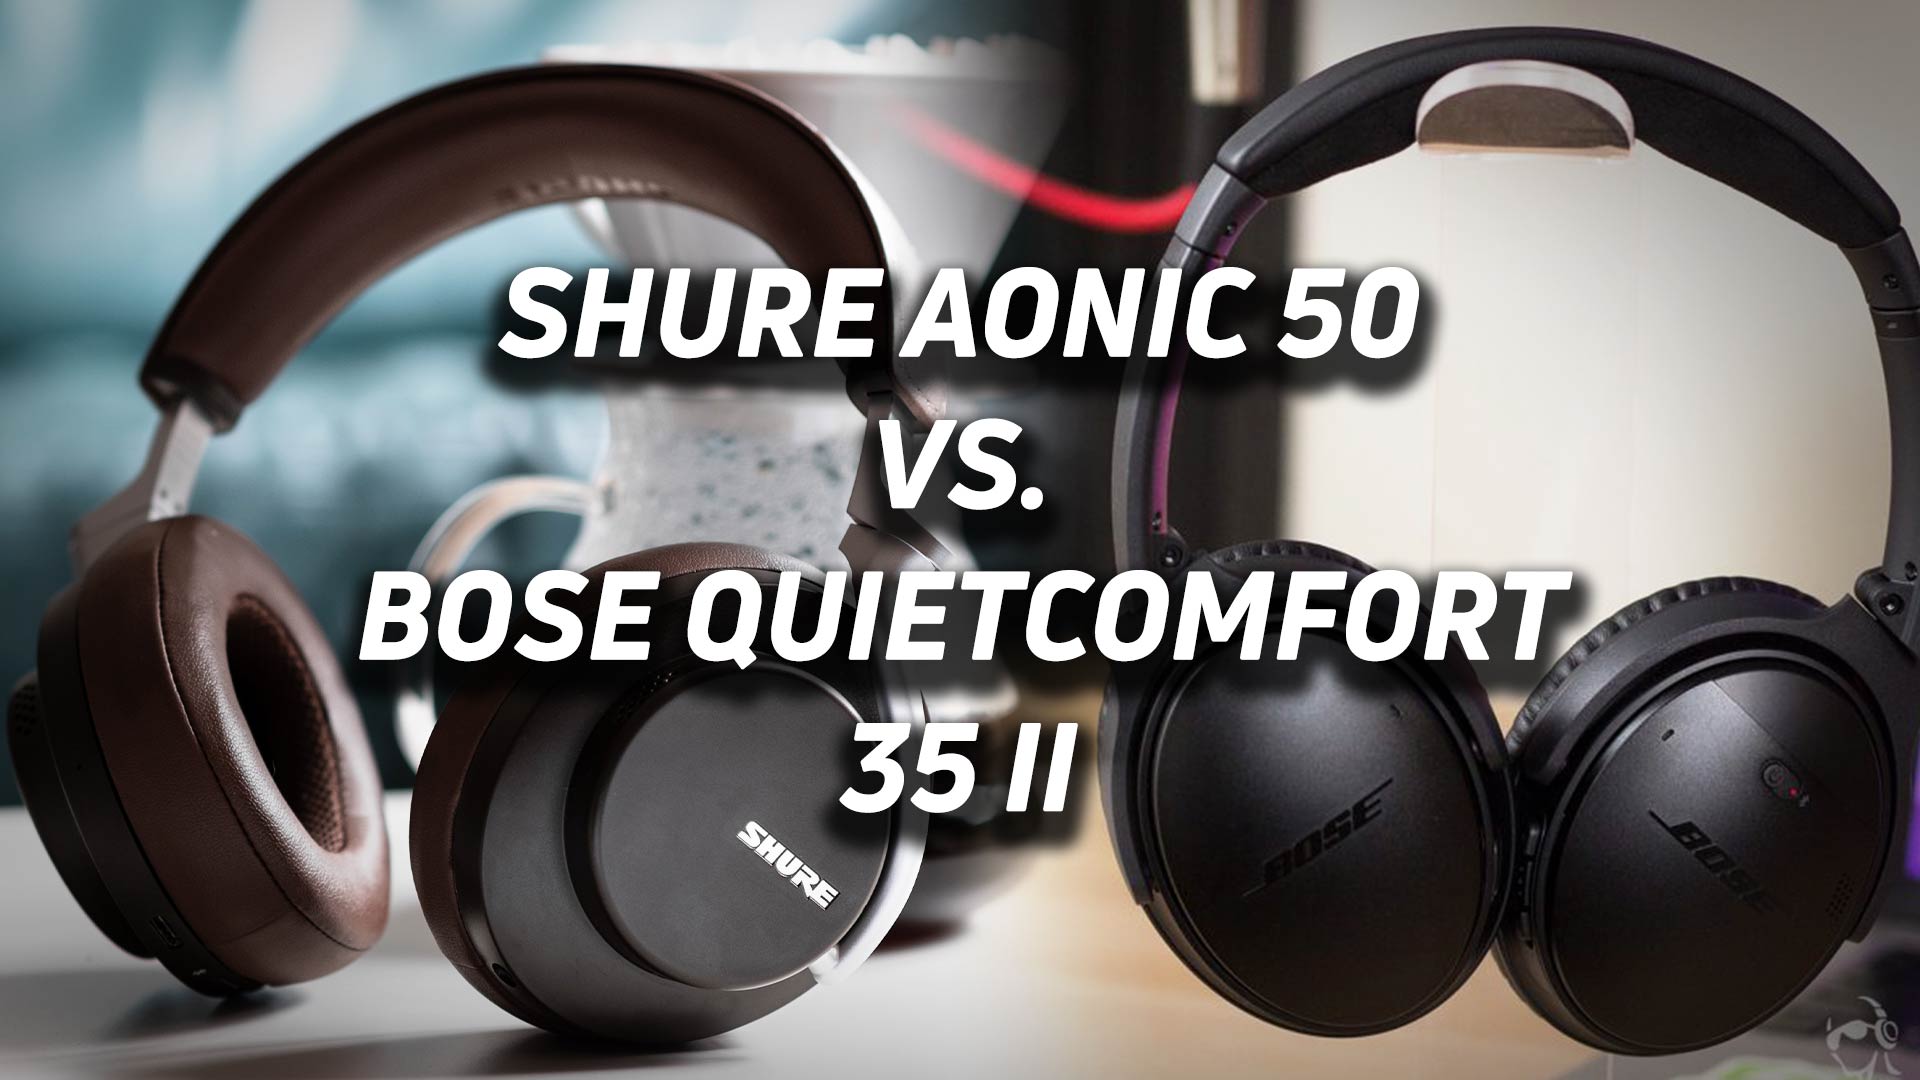 A blended image of the Shure AONIC 50 vs Bose QuietComfort 35 II noise canceling headphones.